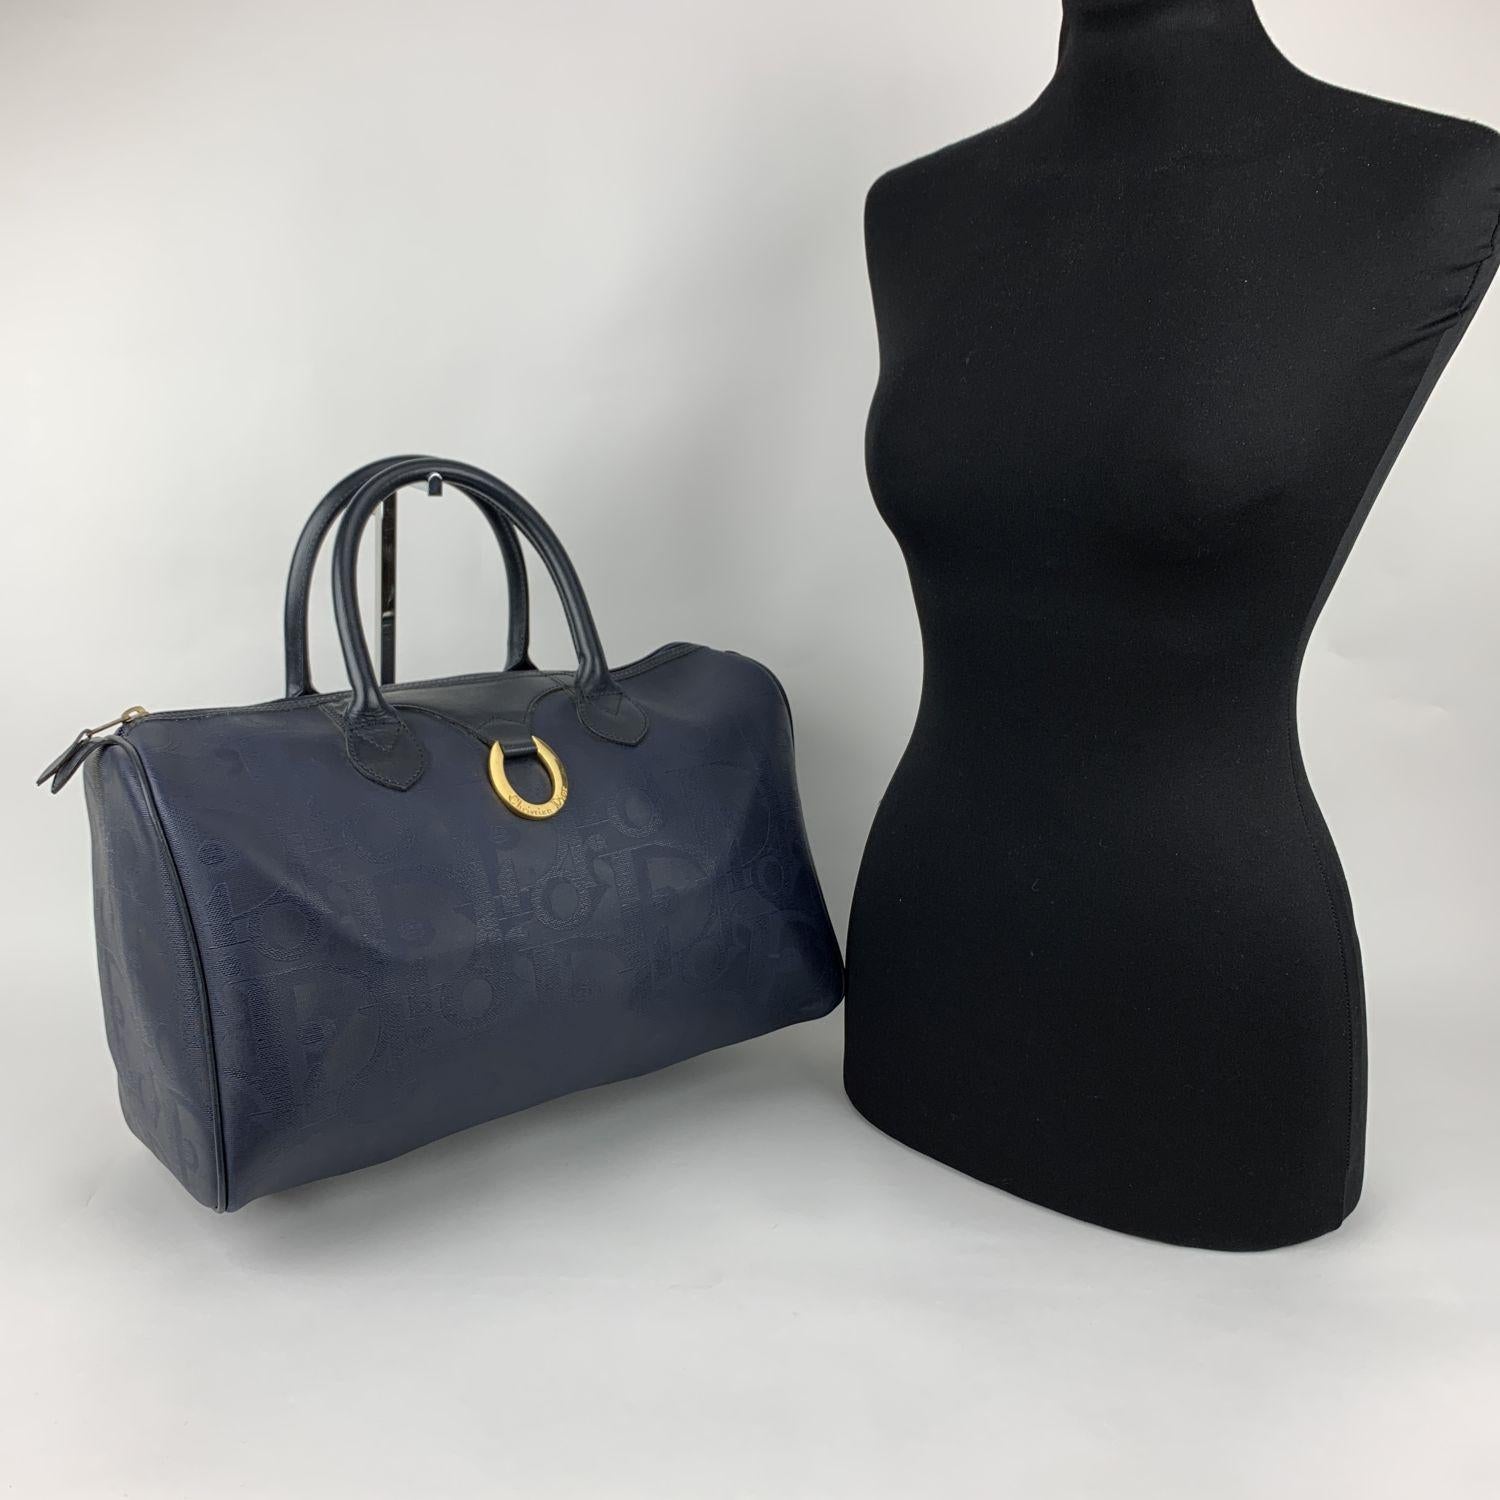 Vintage duffle boston bag by Christian Dior. Big Dior monogram pattern in blue color. Gold metal ring with Dior signature on the front. Upper zipper closure. Top leather handles. Canvas lining with 1 side zip pocket inside. 'Christian Dior - Made in